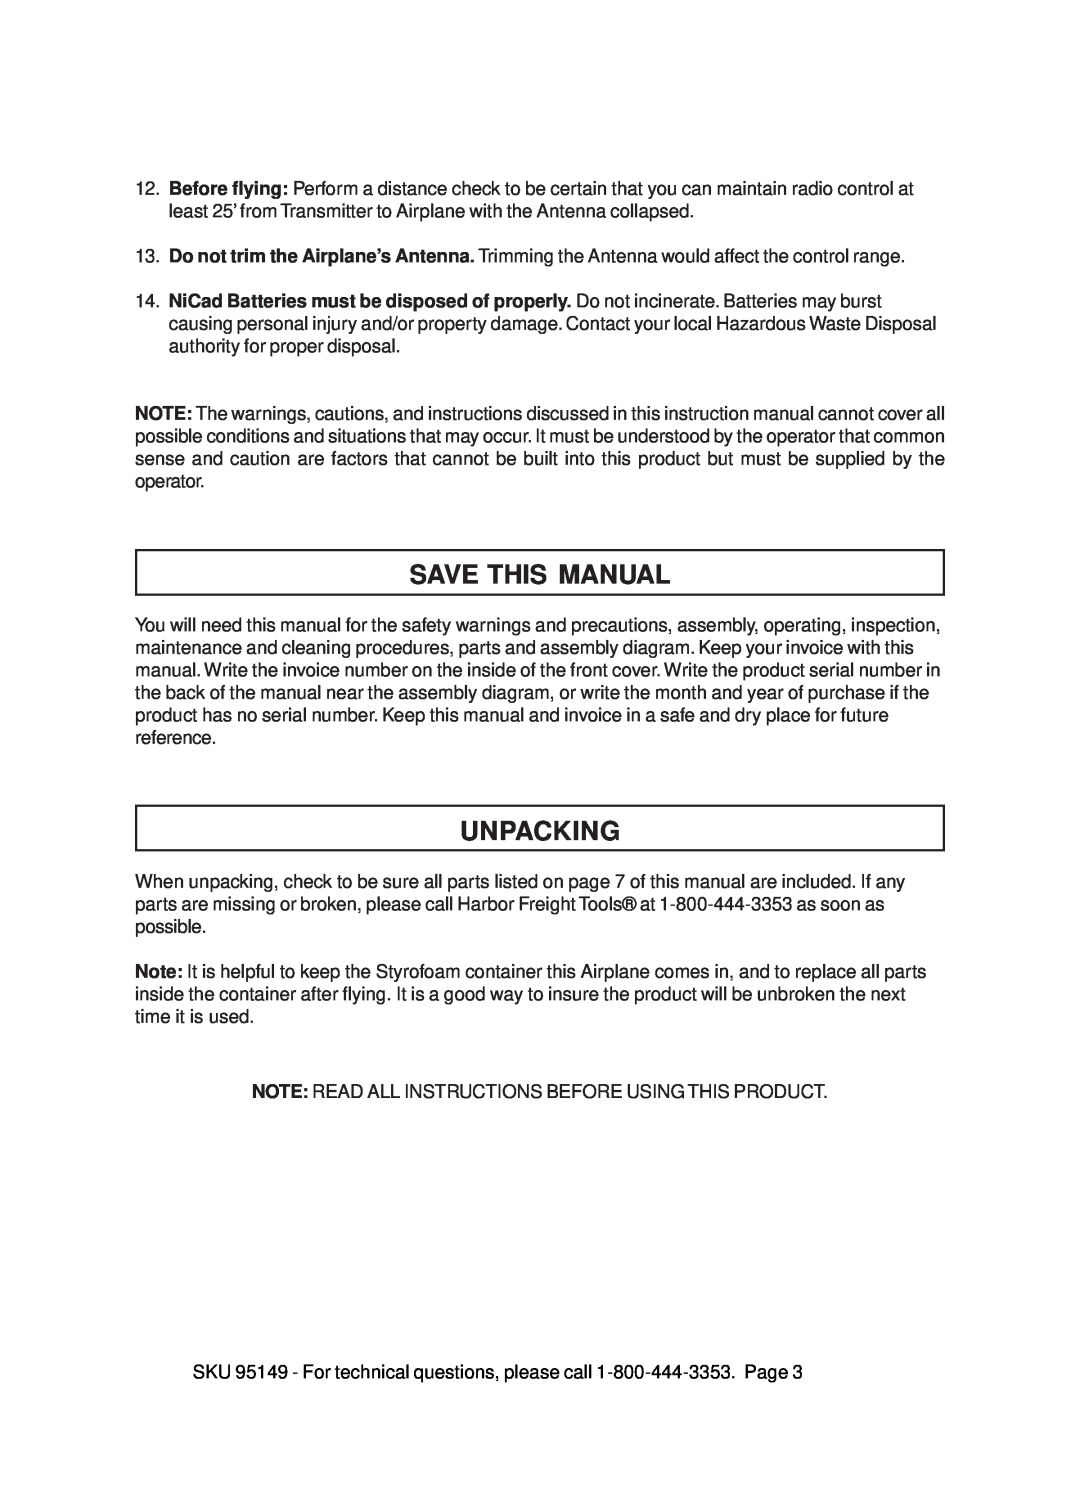 Harbor Freight Tools 95149 warranty Save This Manual, Unpacking 